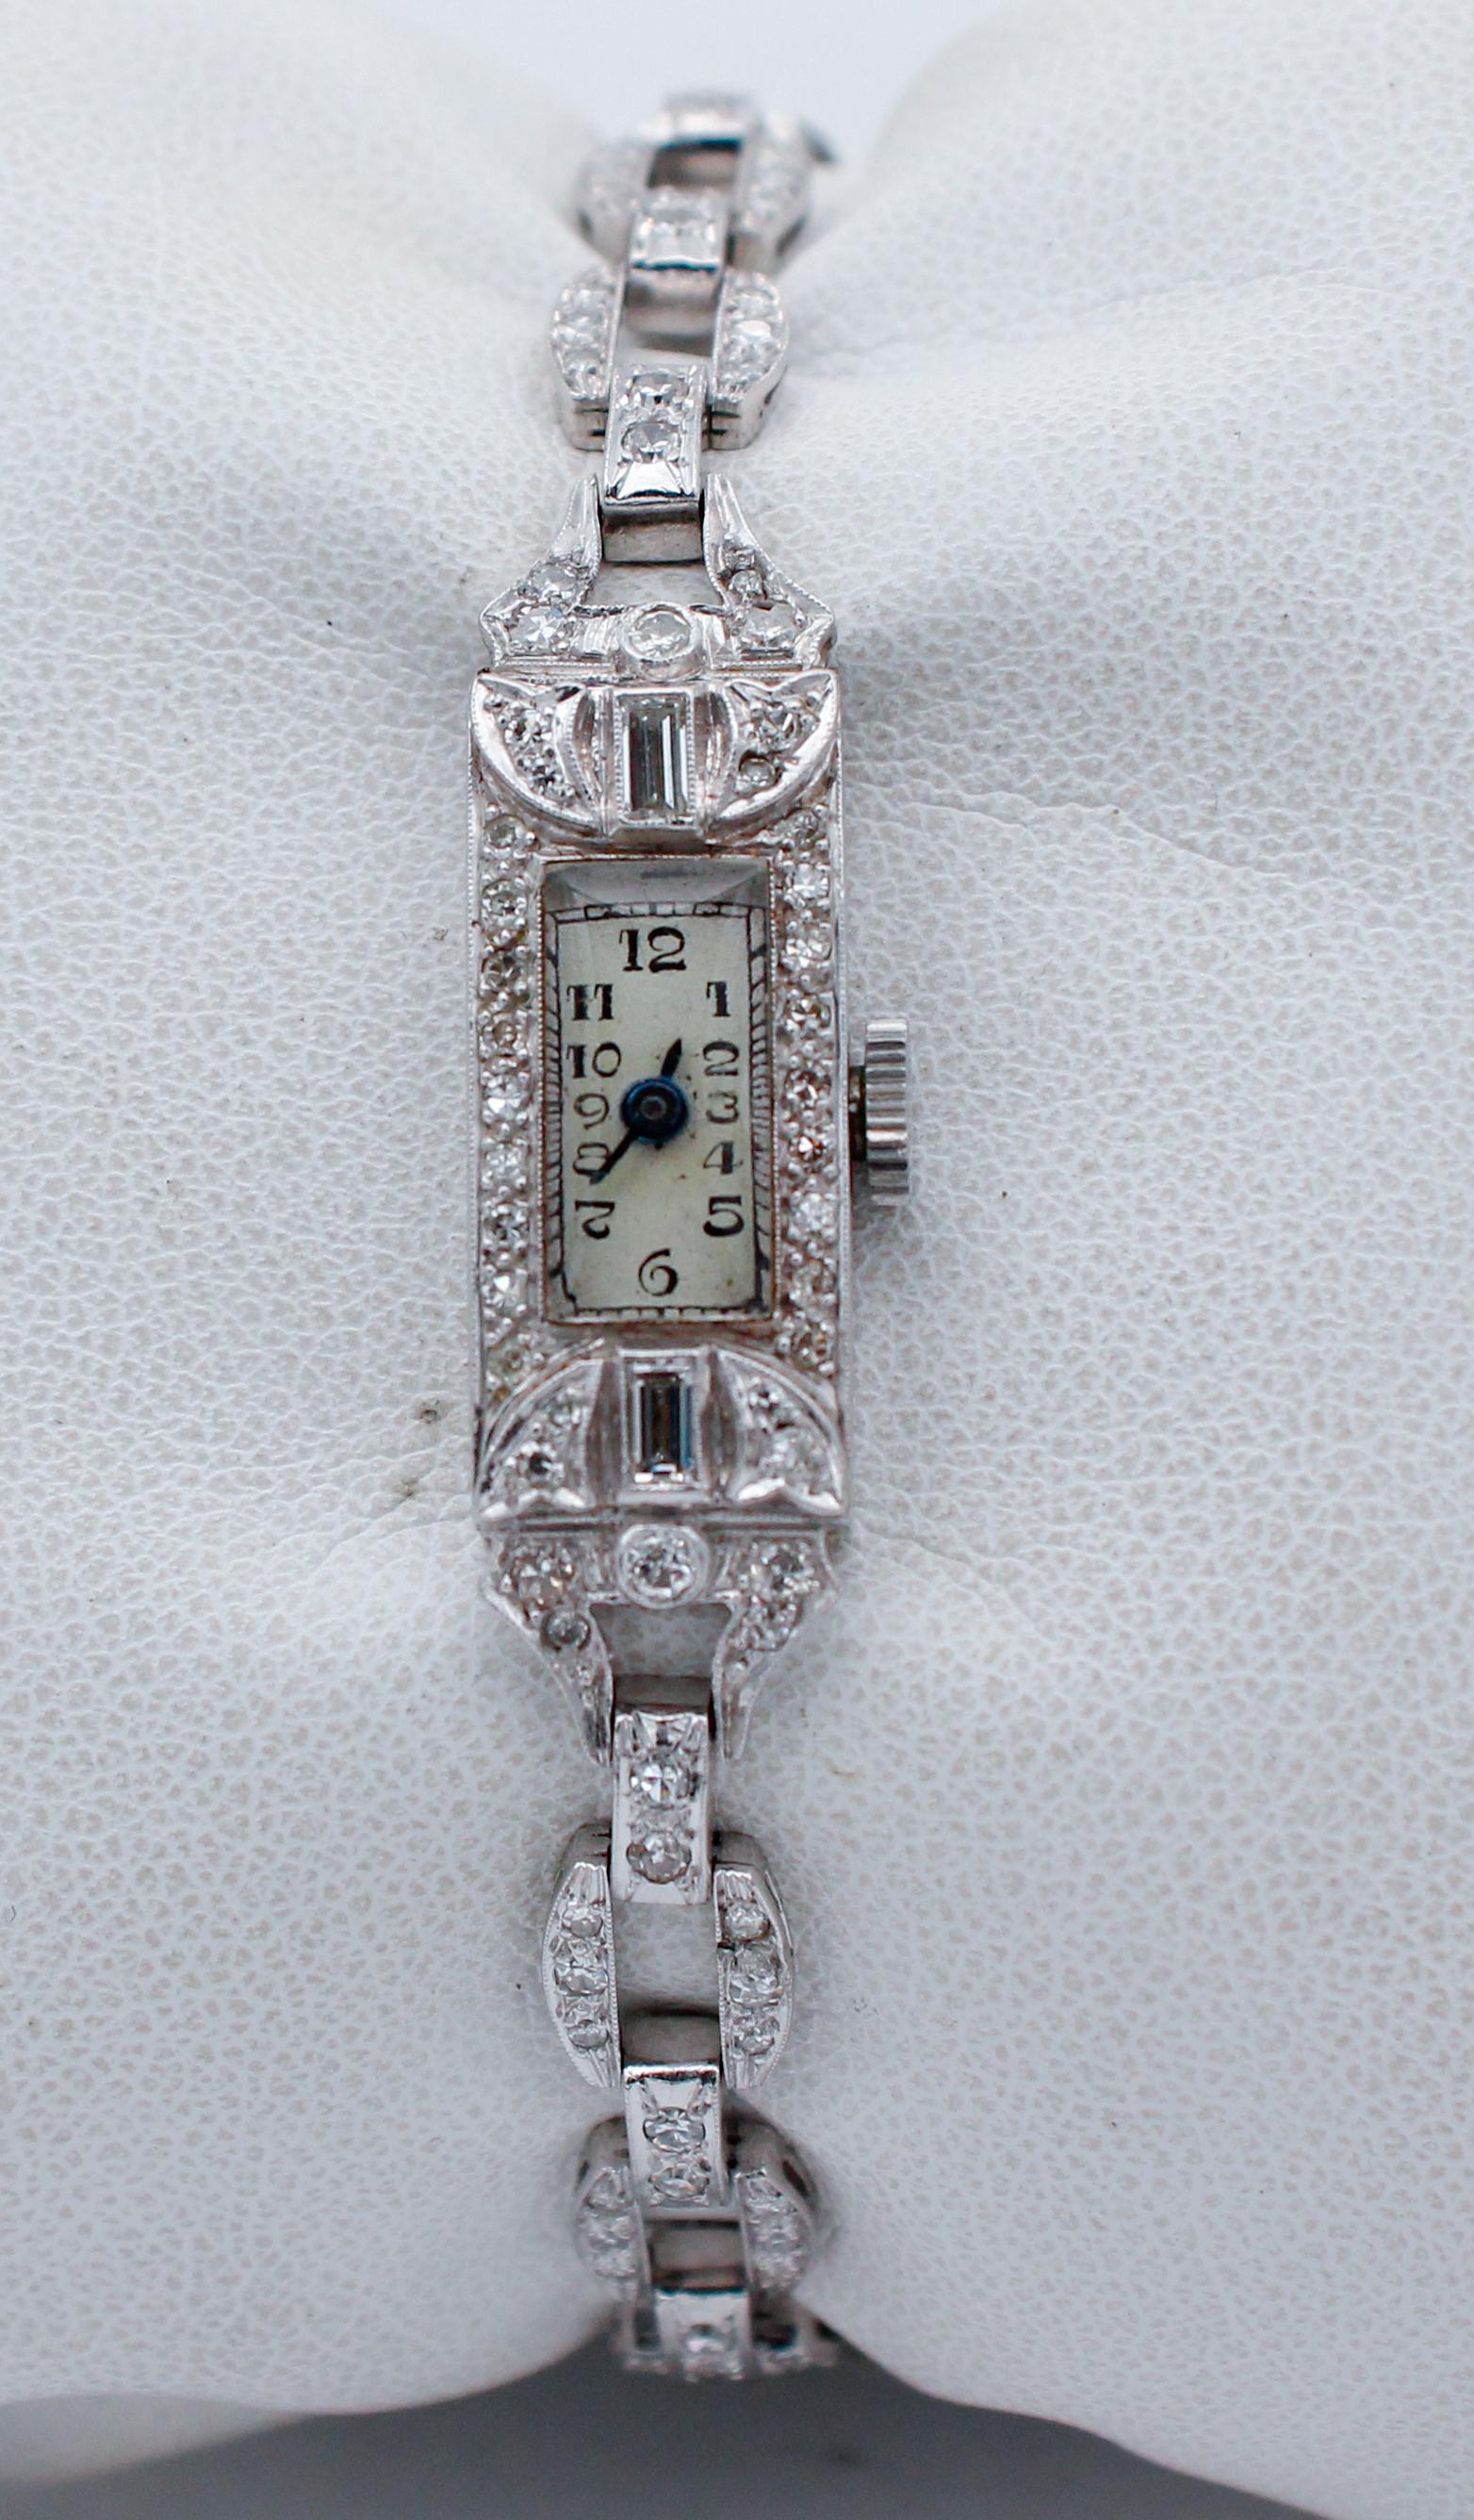 Elegant bracelet/wrist watch in platinum structure studded with diamonds.
The origin of this bracelet goes back to the 1970s and it is in perfect condition.
Diamonds 2.00 ct
Total Weight 19.00
RF   +ORIF
Lenght 17.5 cm

For any inquiries, please